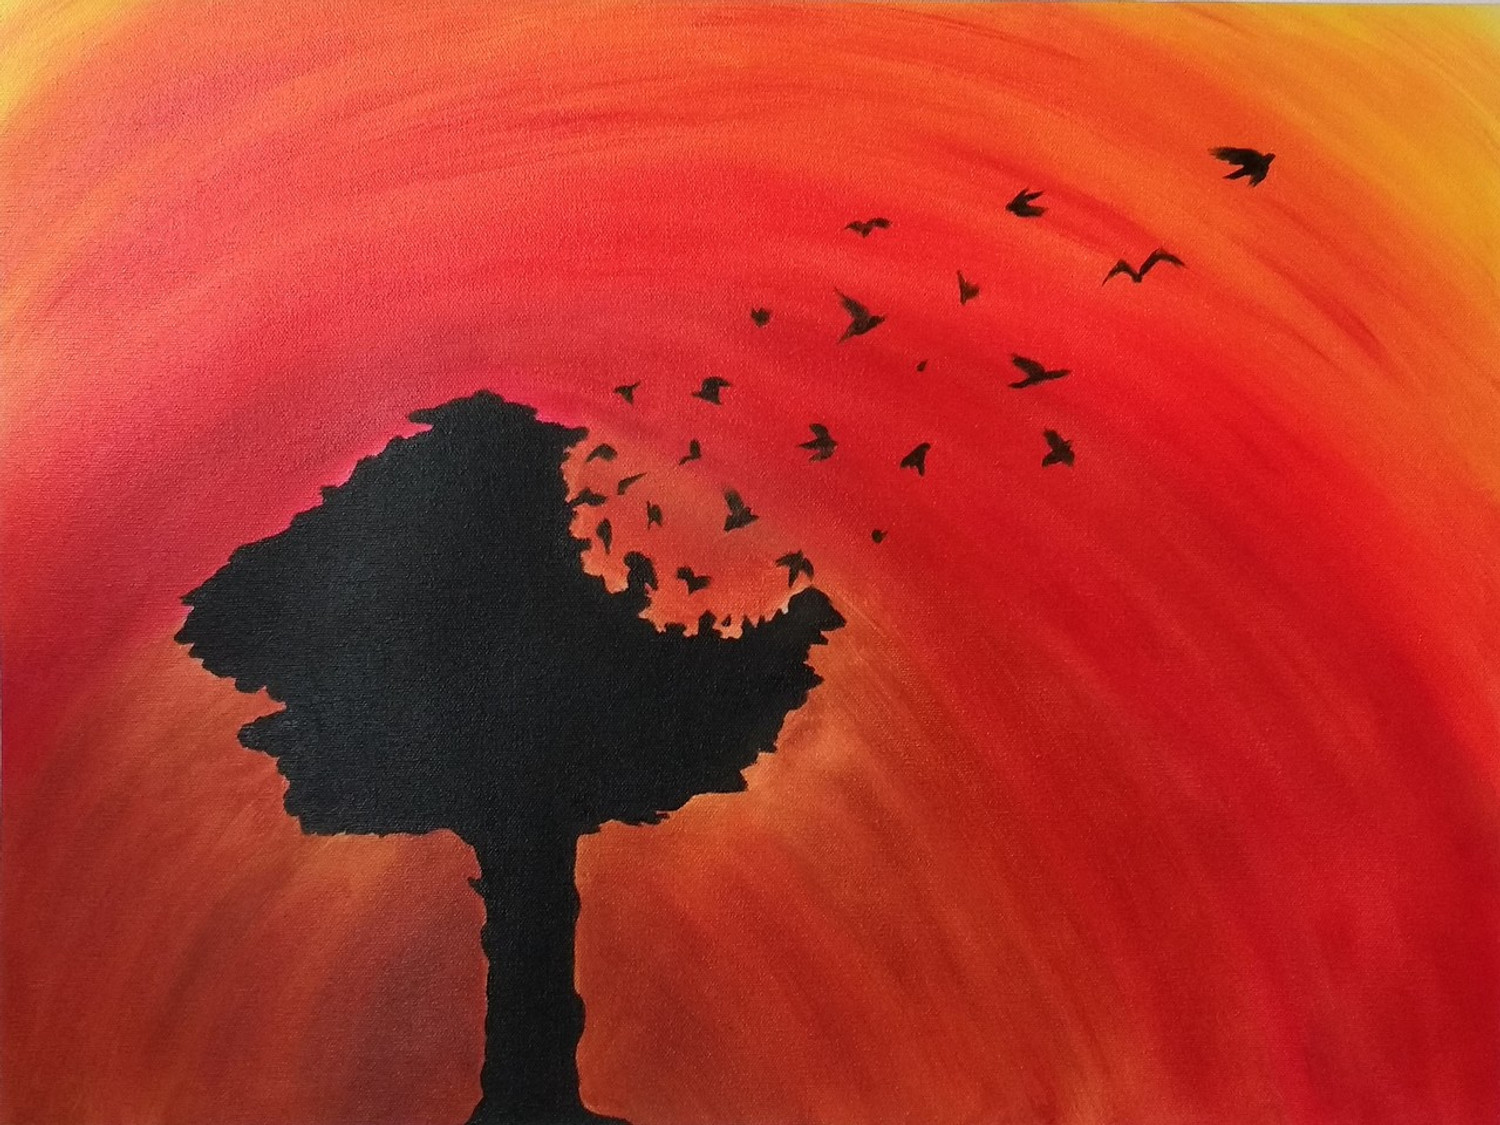 Its An Beautiful Sunset Painting Done With - GranNino